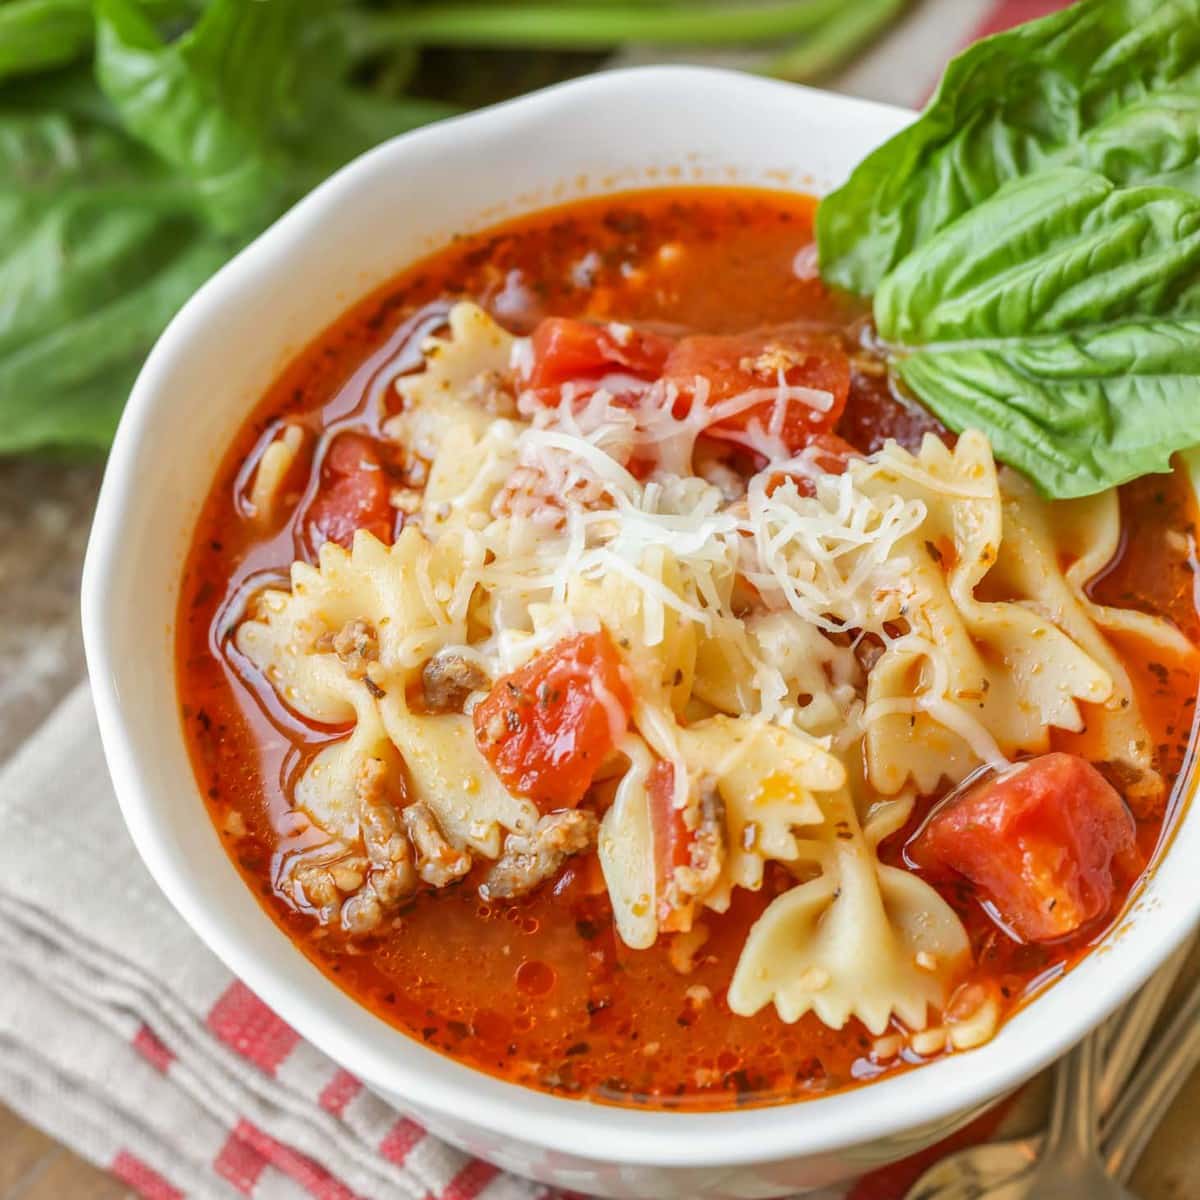 Easy soup recipes - Lasagna soup topped with fresh basil leaves in a white bowl.